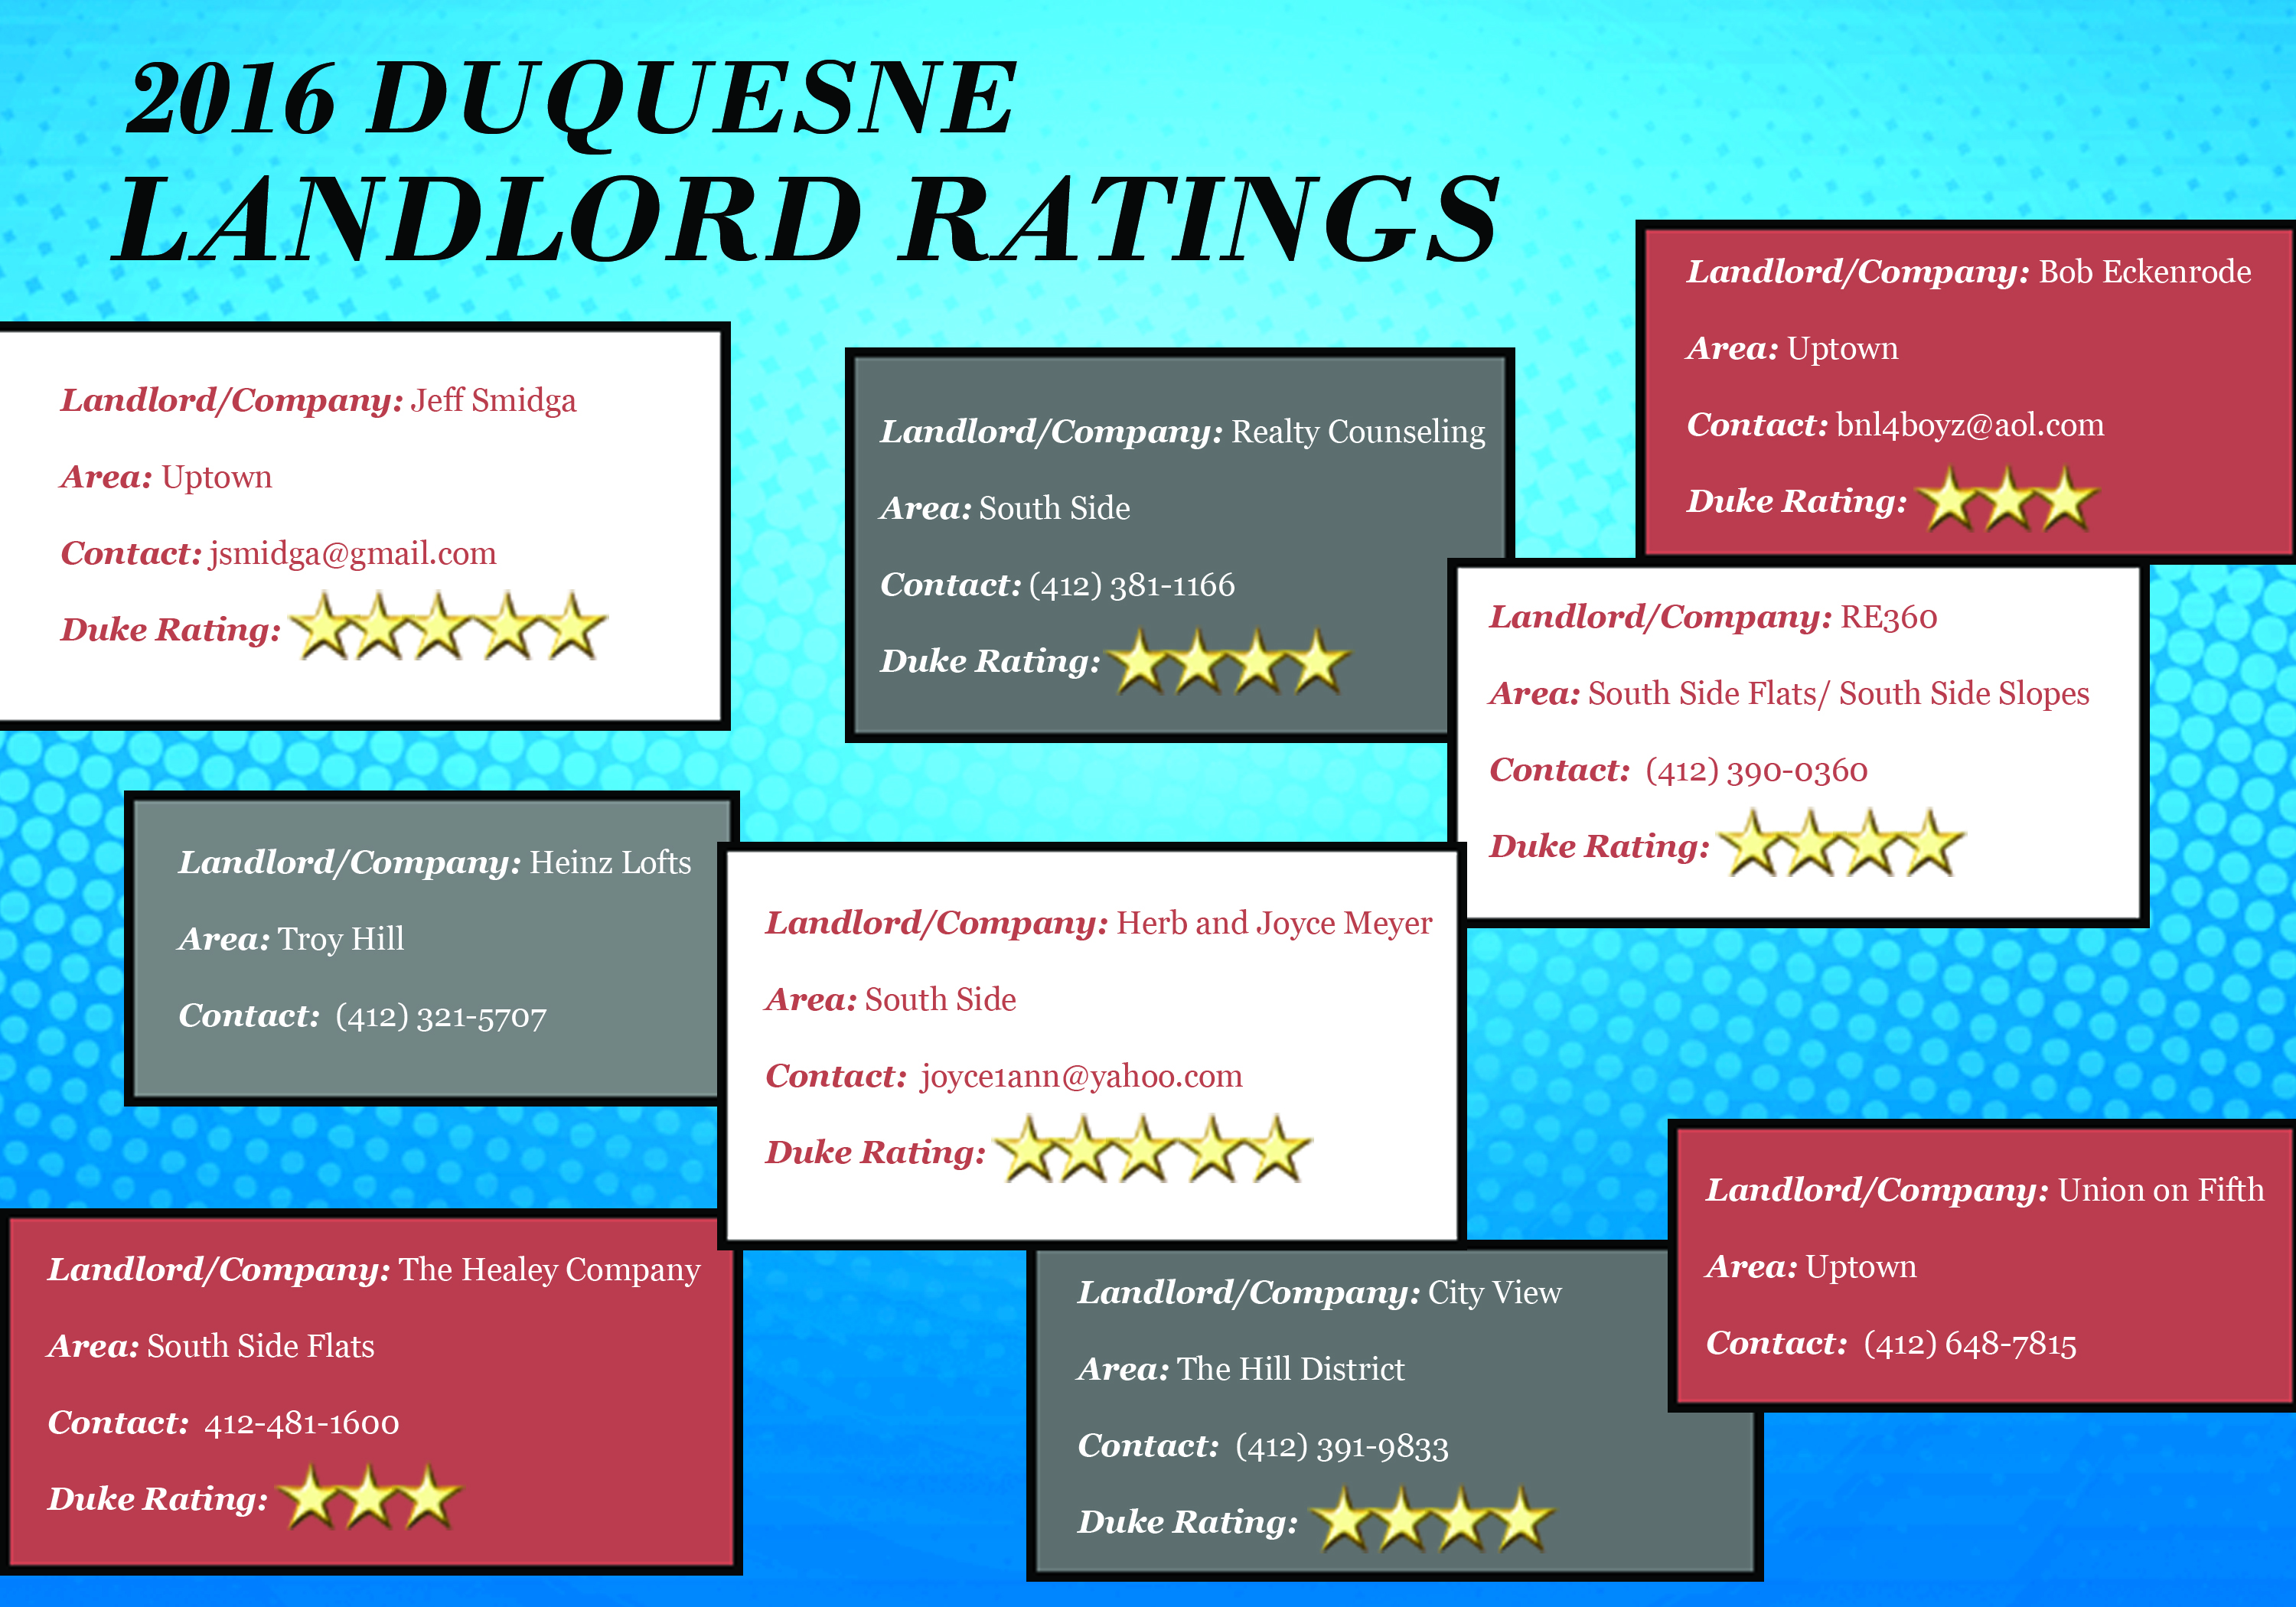 Landlord Ratings Infographic